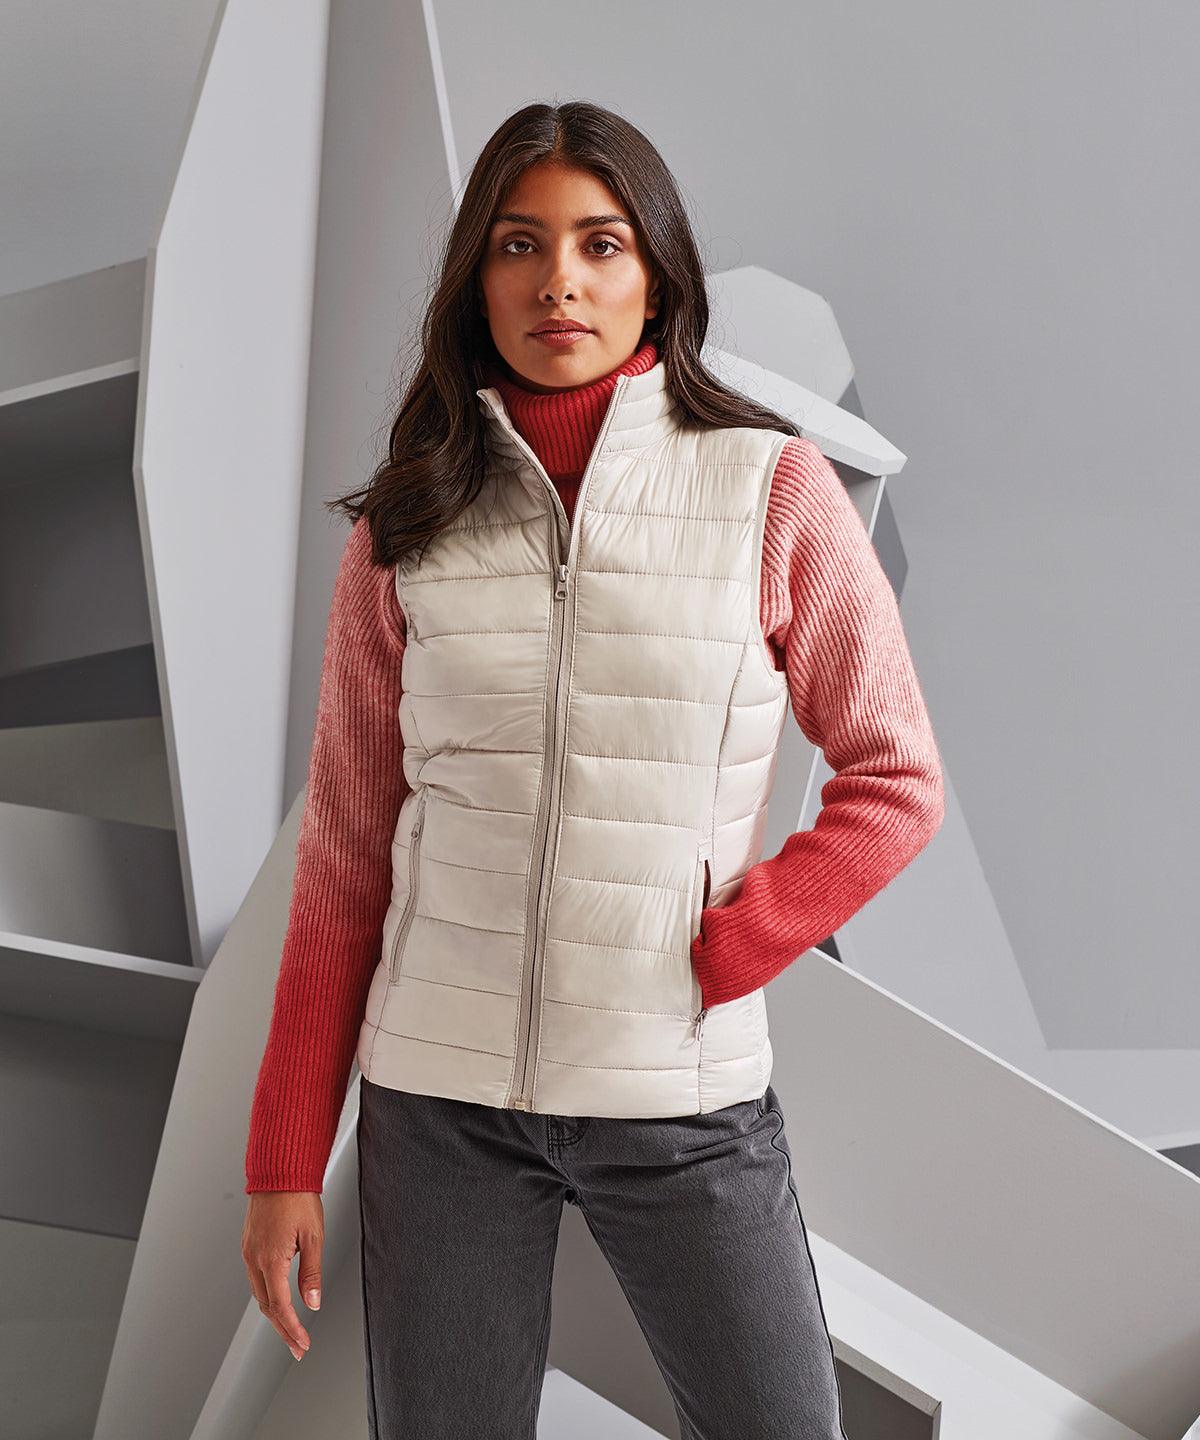 Royal - Women's terrain padded gilet Body Warmers 2786 Alfresco Dining, Gilets and Bodywarmers, Jackets & Coats, Must Haves, Outdoor Dining, Padded & Insulation, Women's Fashion Schoolwear Centres